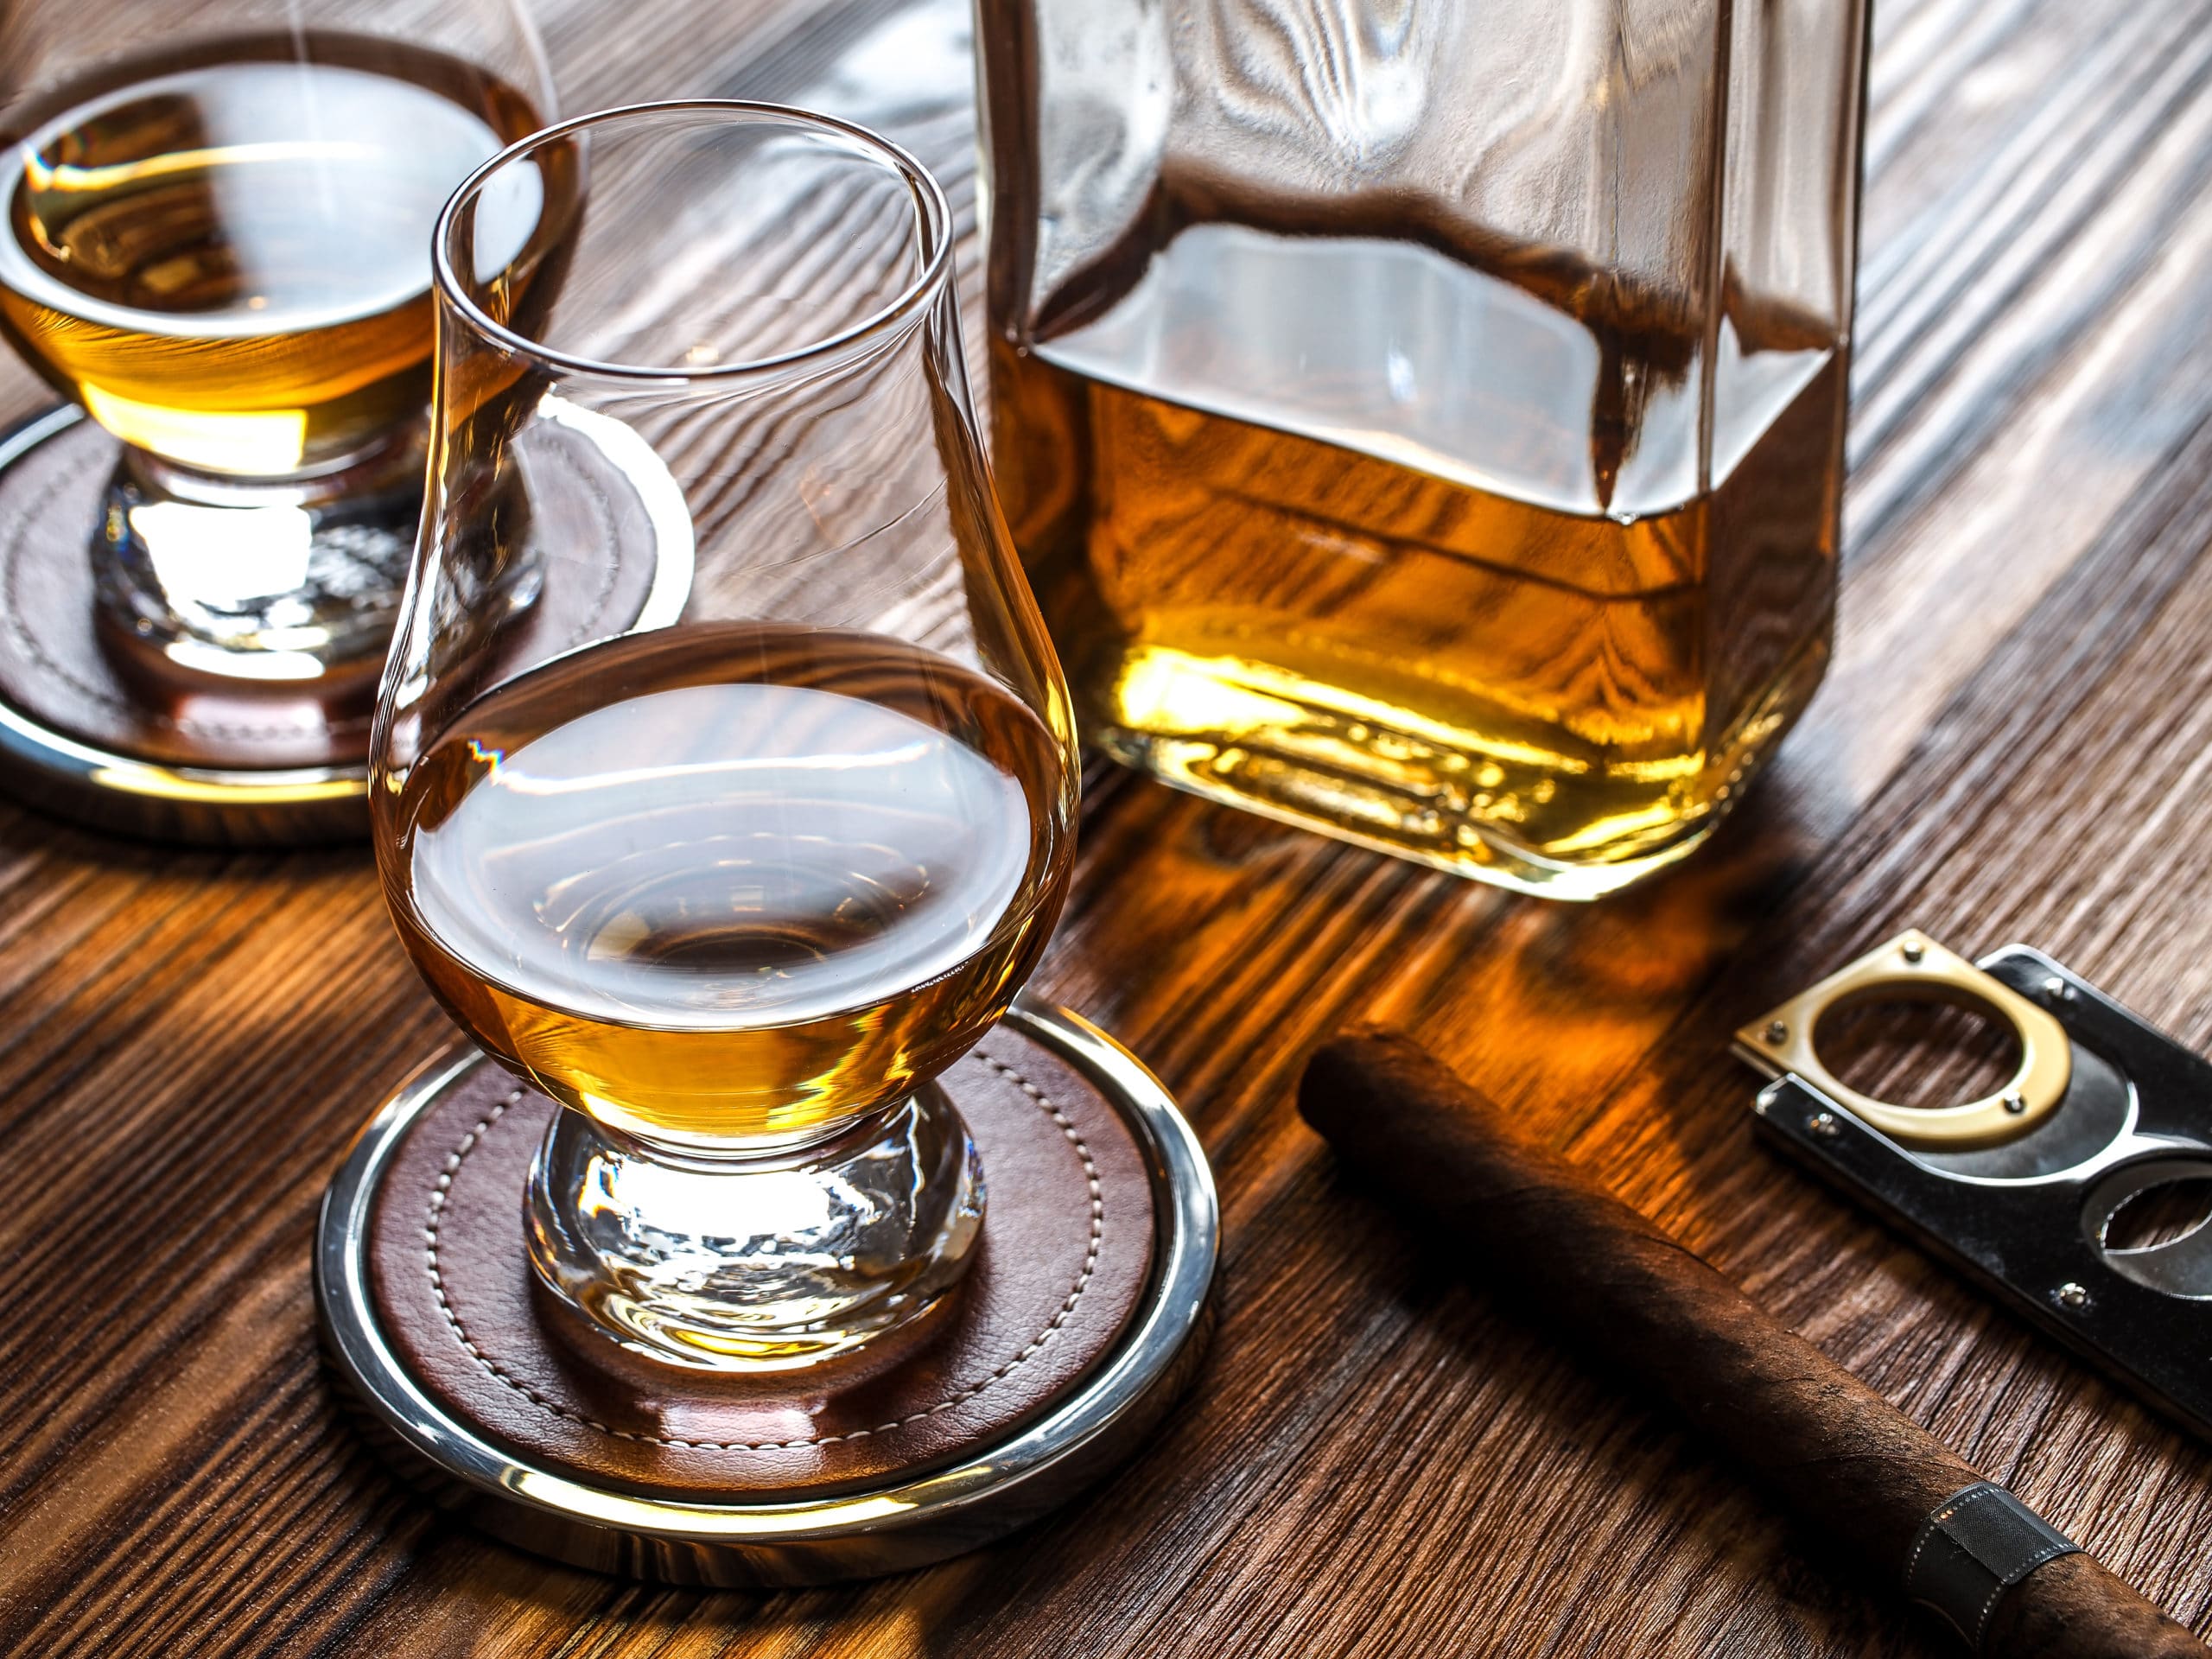 Whiskey Scotch Glasses Clearance Prices, Save 51% | jlcatj.gob.mx